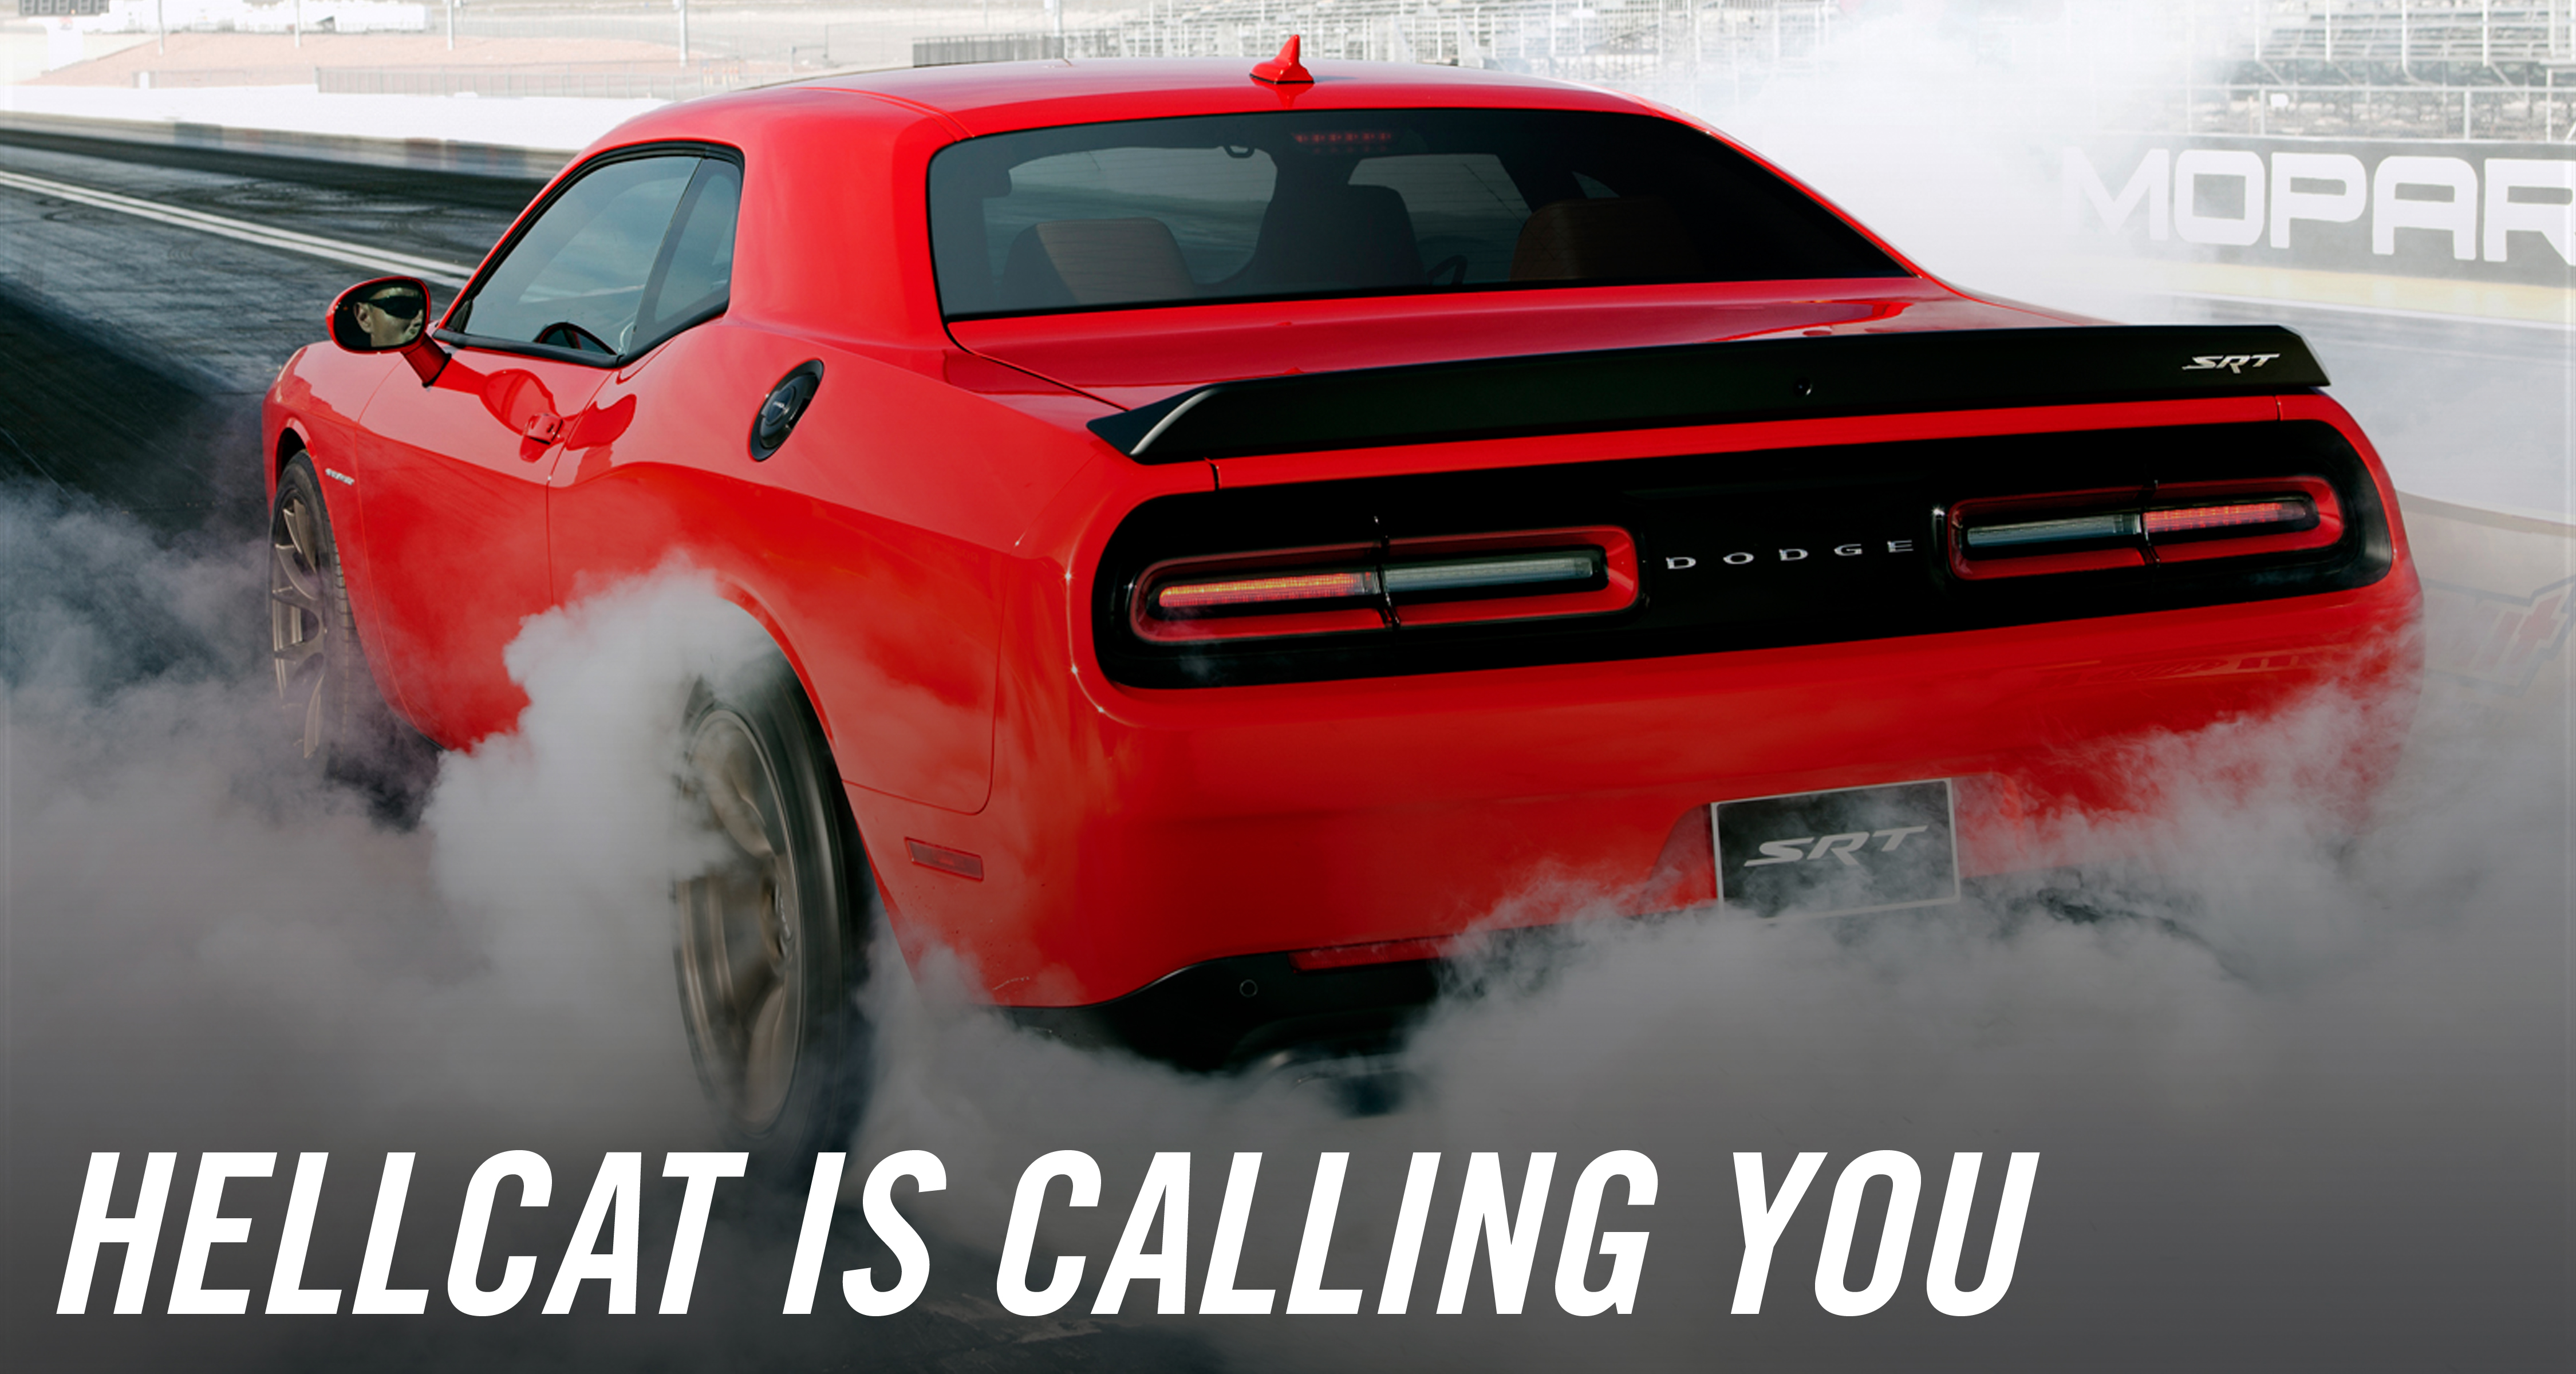 The All New Hellcat Engine Ringtone Is Calling You